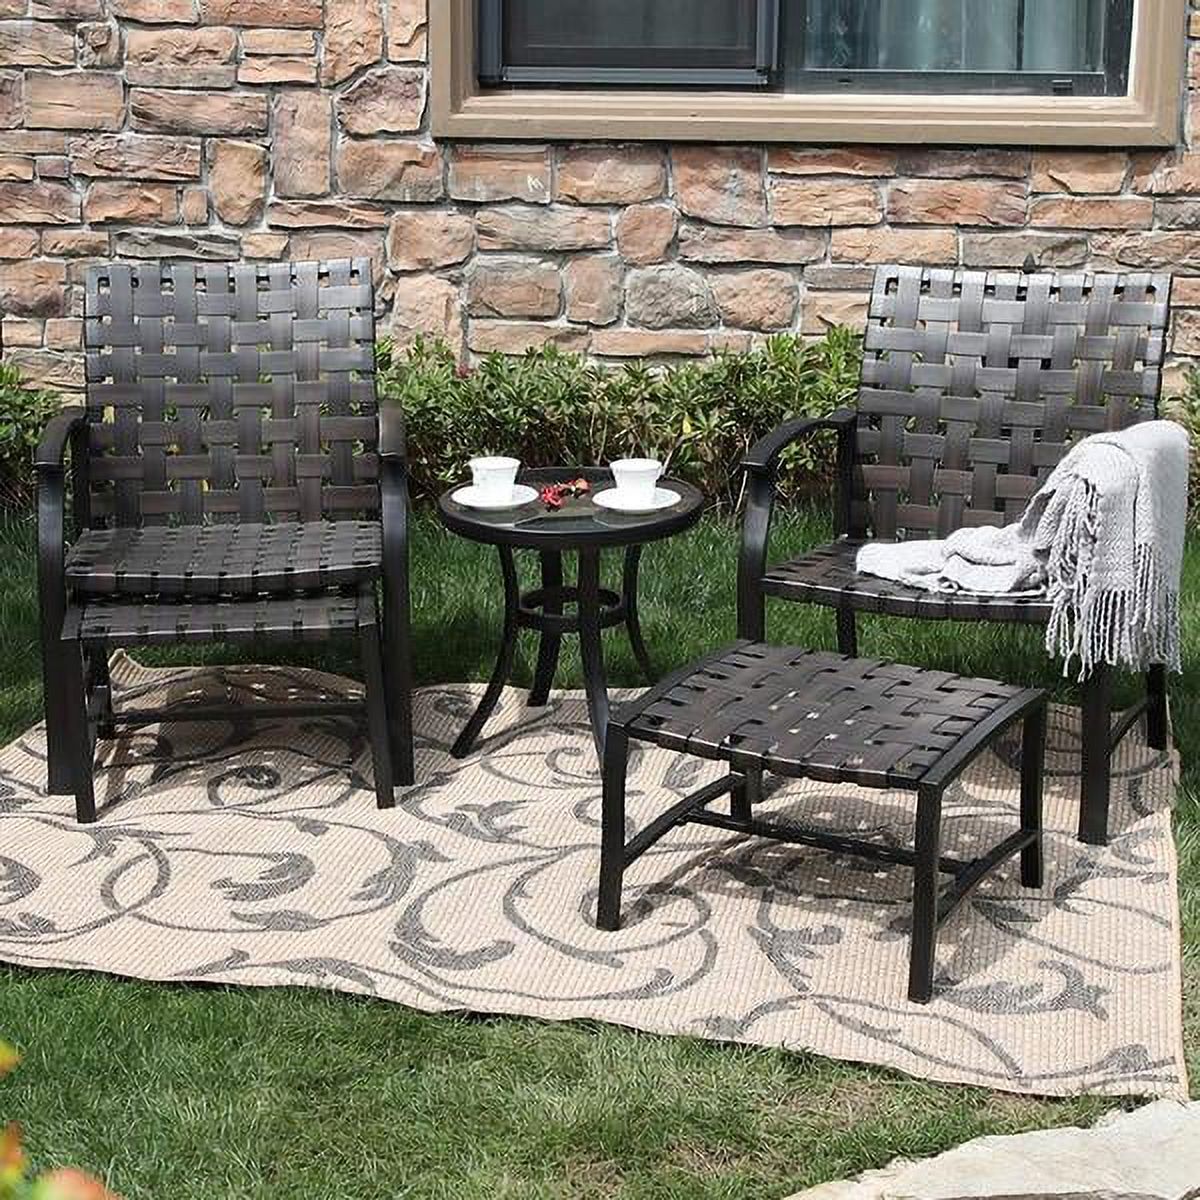 Sophia & William 5pcs Outdoor Patio Furniture Conversation Set Steel Frame Leather Dining Set, Table - image 1 of 8